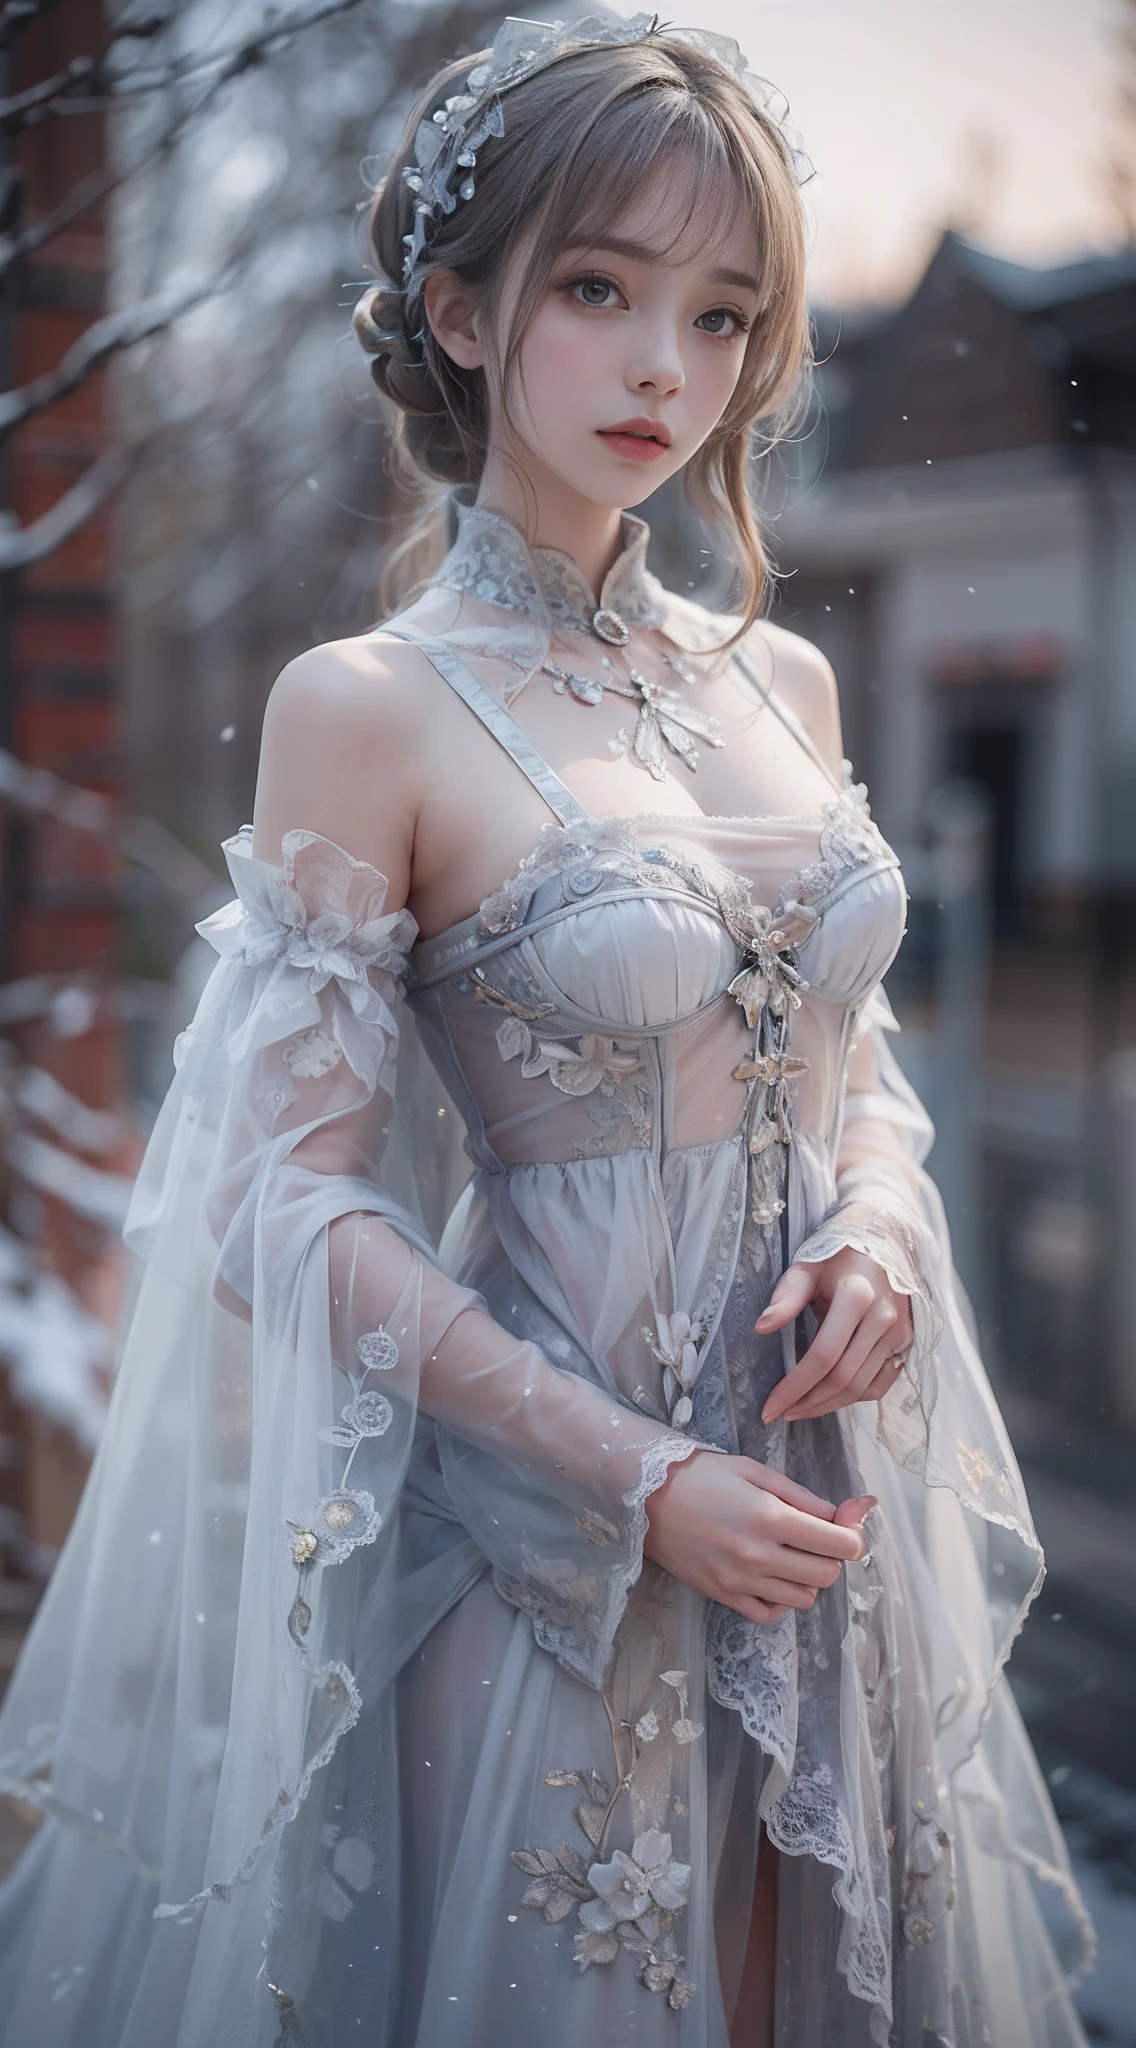 （8K， RAW photos， best qualtiy， tmasterpiece：1.2），（realisticlying， photograph realistic：1.4)，Hide your face with sadness，
Lolita costume，Lace， Aerith Gainsborough， The upper part of the body， undergarments，exposed bare shoulders， do lado de fora， (outside，Covered with snow，Cloak，) high high quality， Adobe Lightroom， highdetailskin， looking at viewert，